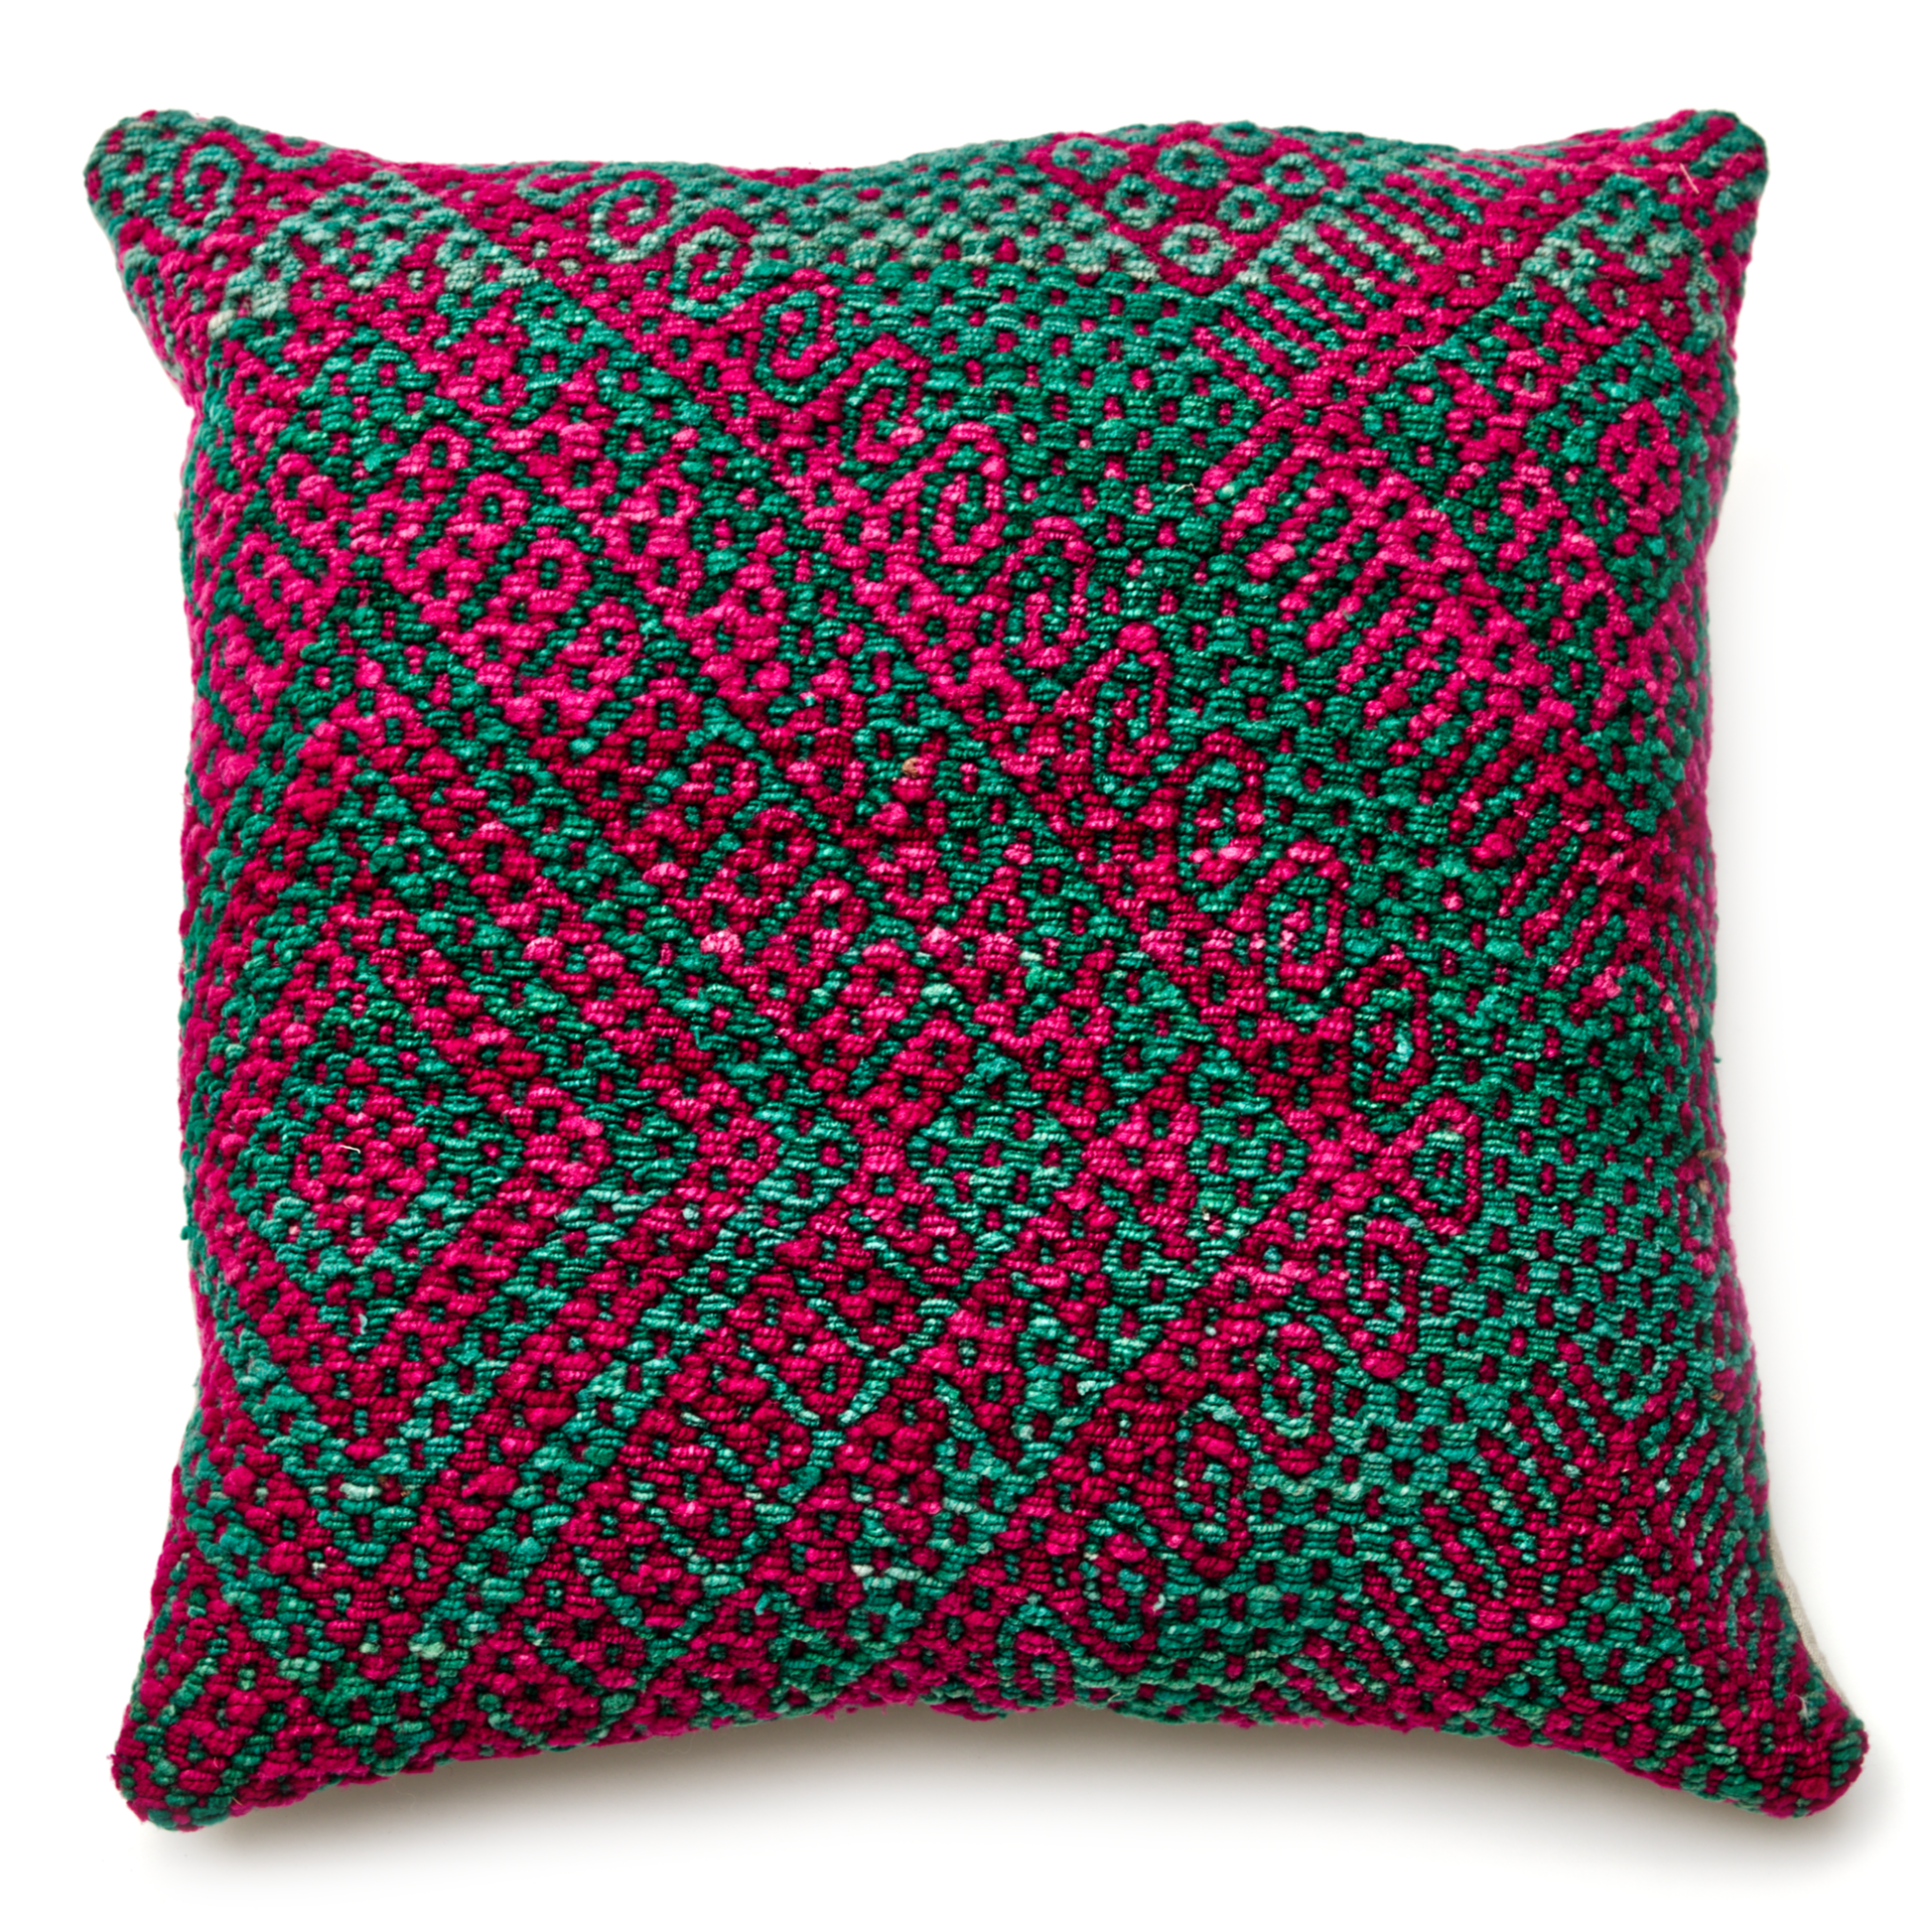 Intiearth vintage woven frazada decorative pillow 20" square colorful wool designs